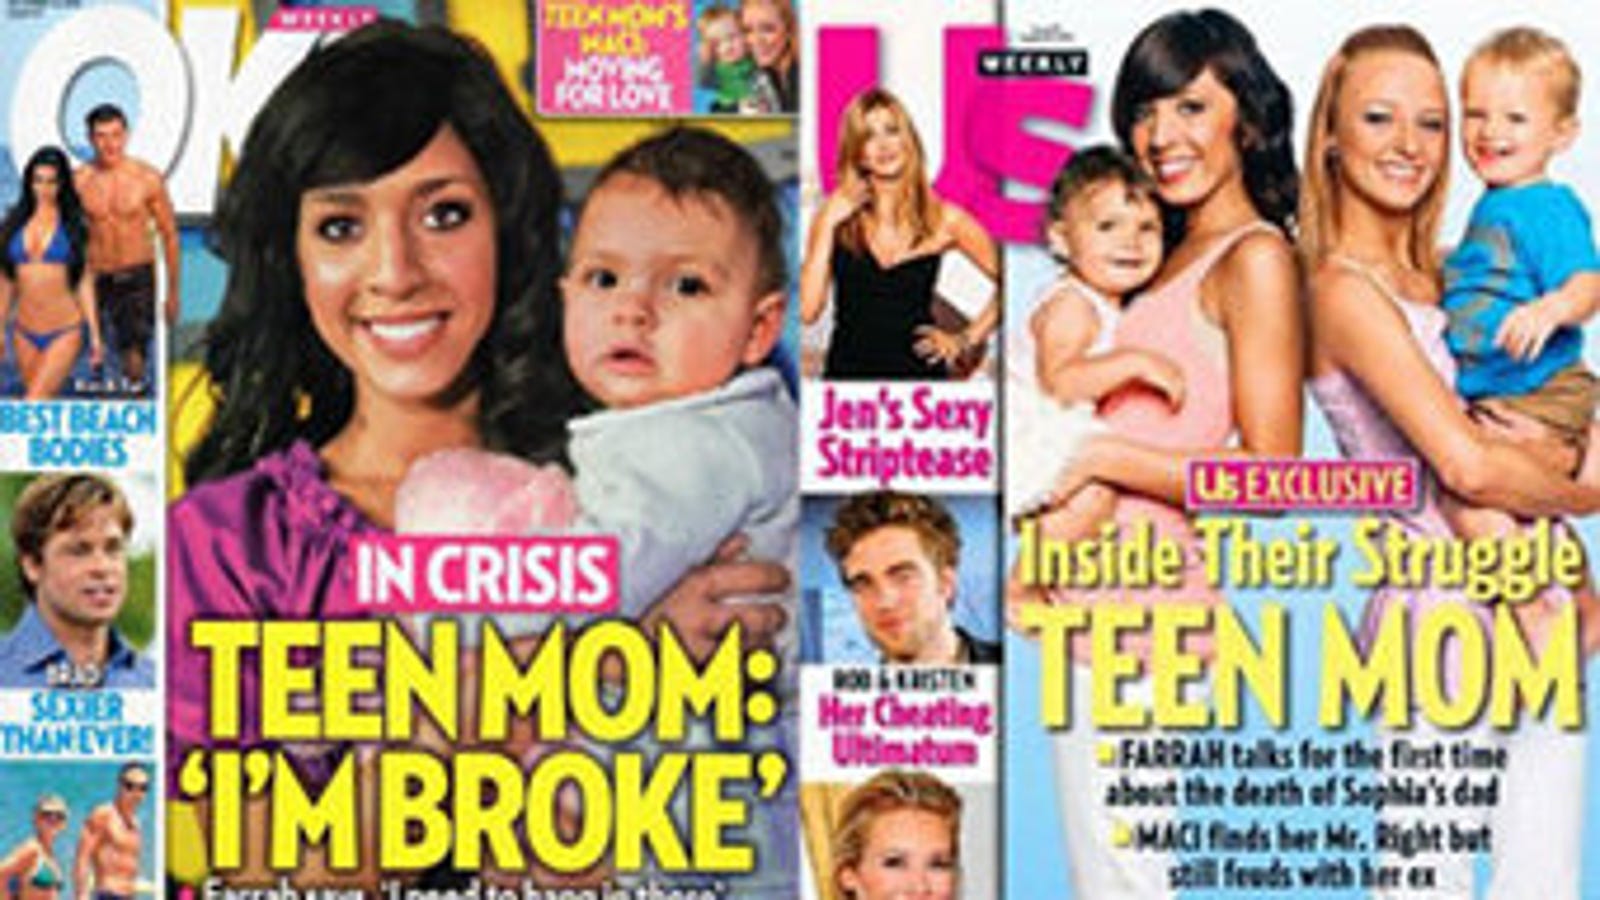 Mtvs Teen Mom Comes With A Boatload Of Problems